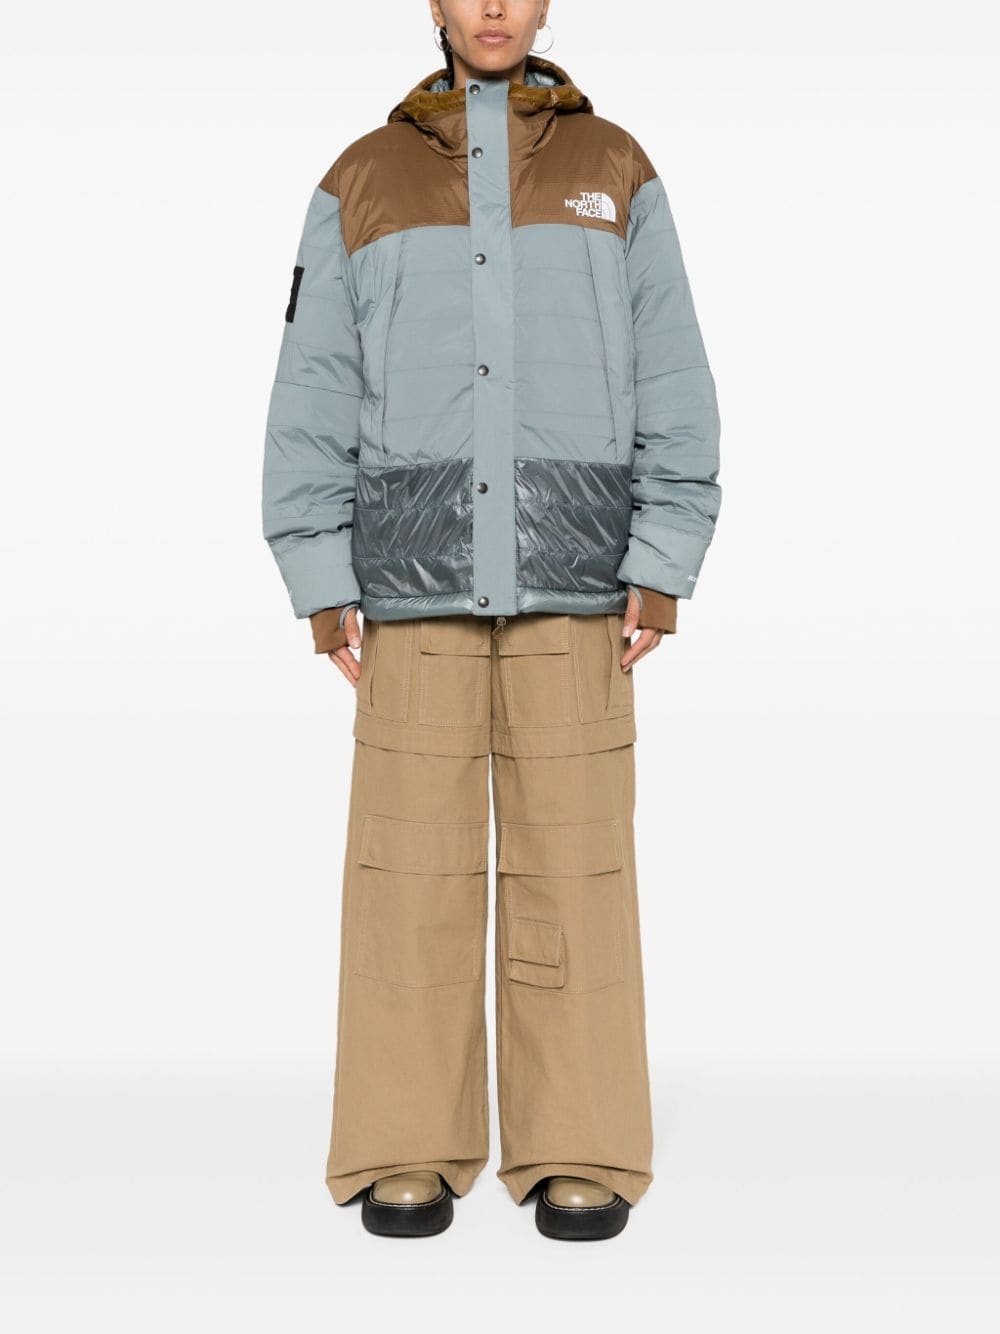 Undercover x The North Face 50/50 Mountain Jacket (NF0A84S3WI7) - 3